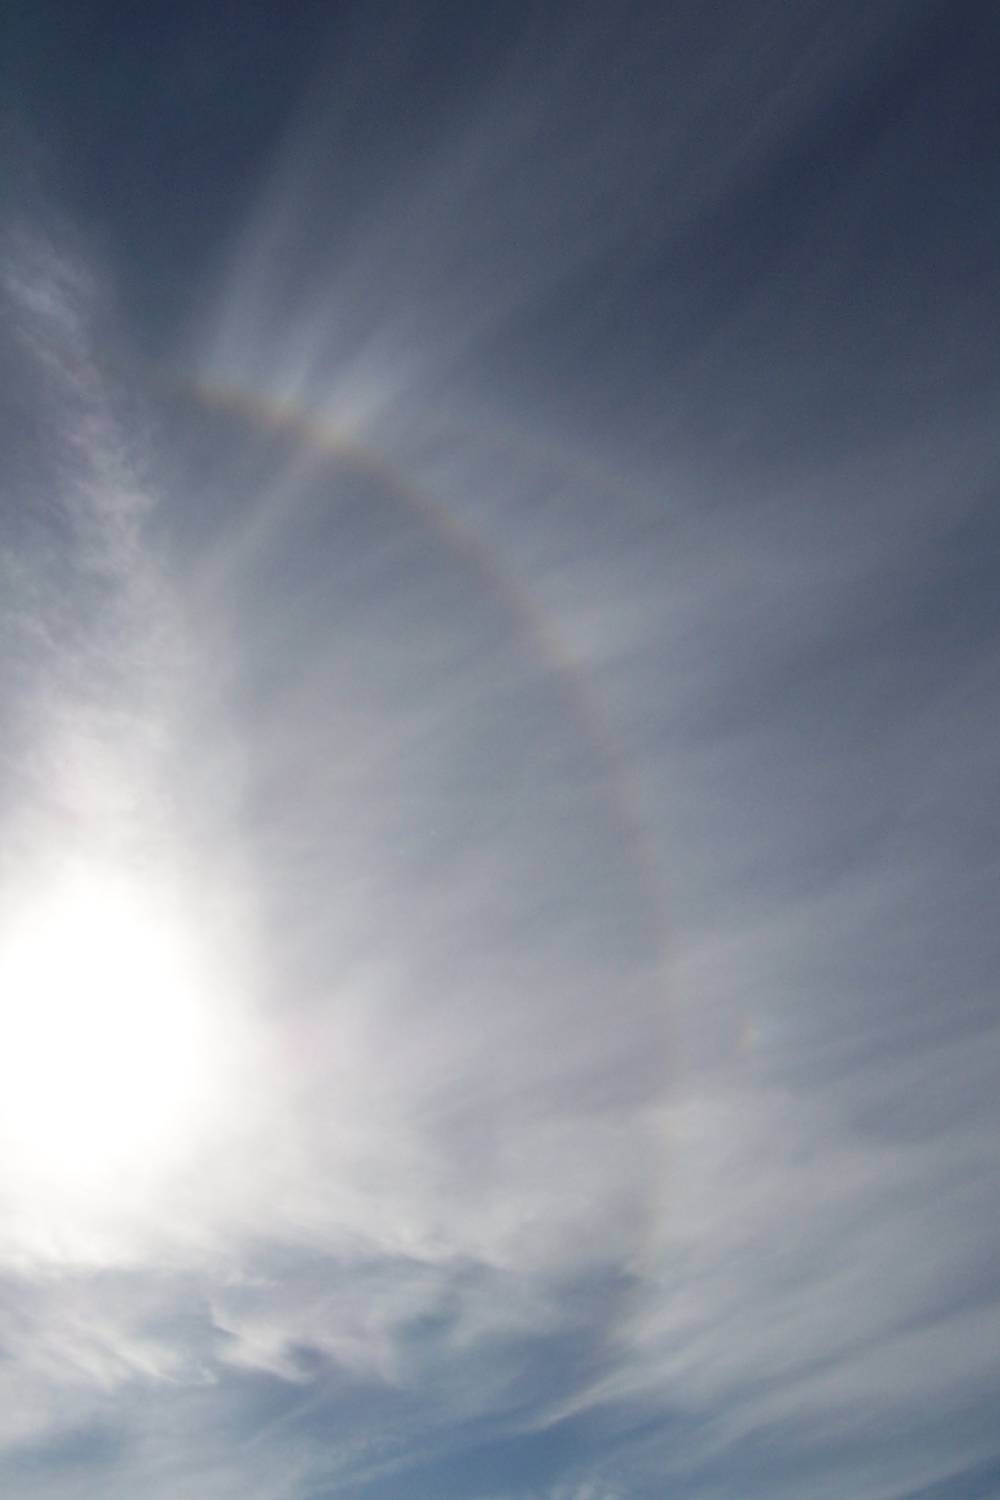 a) Solar circle with tangent arc and right sundog: 49 KB; click on the image to enlarge